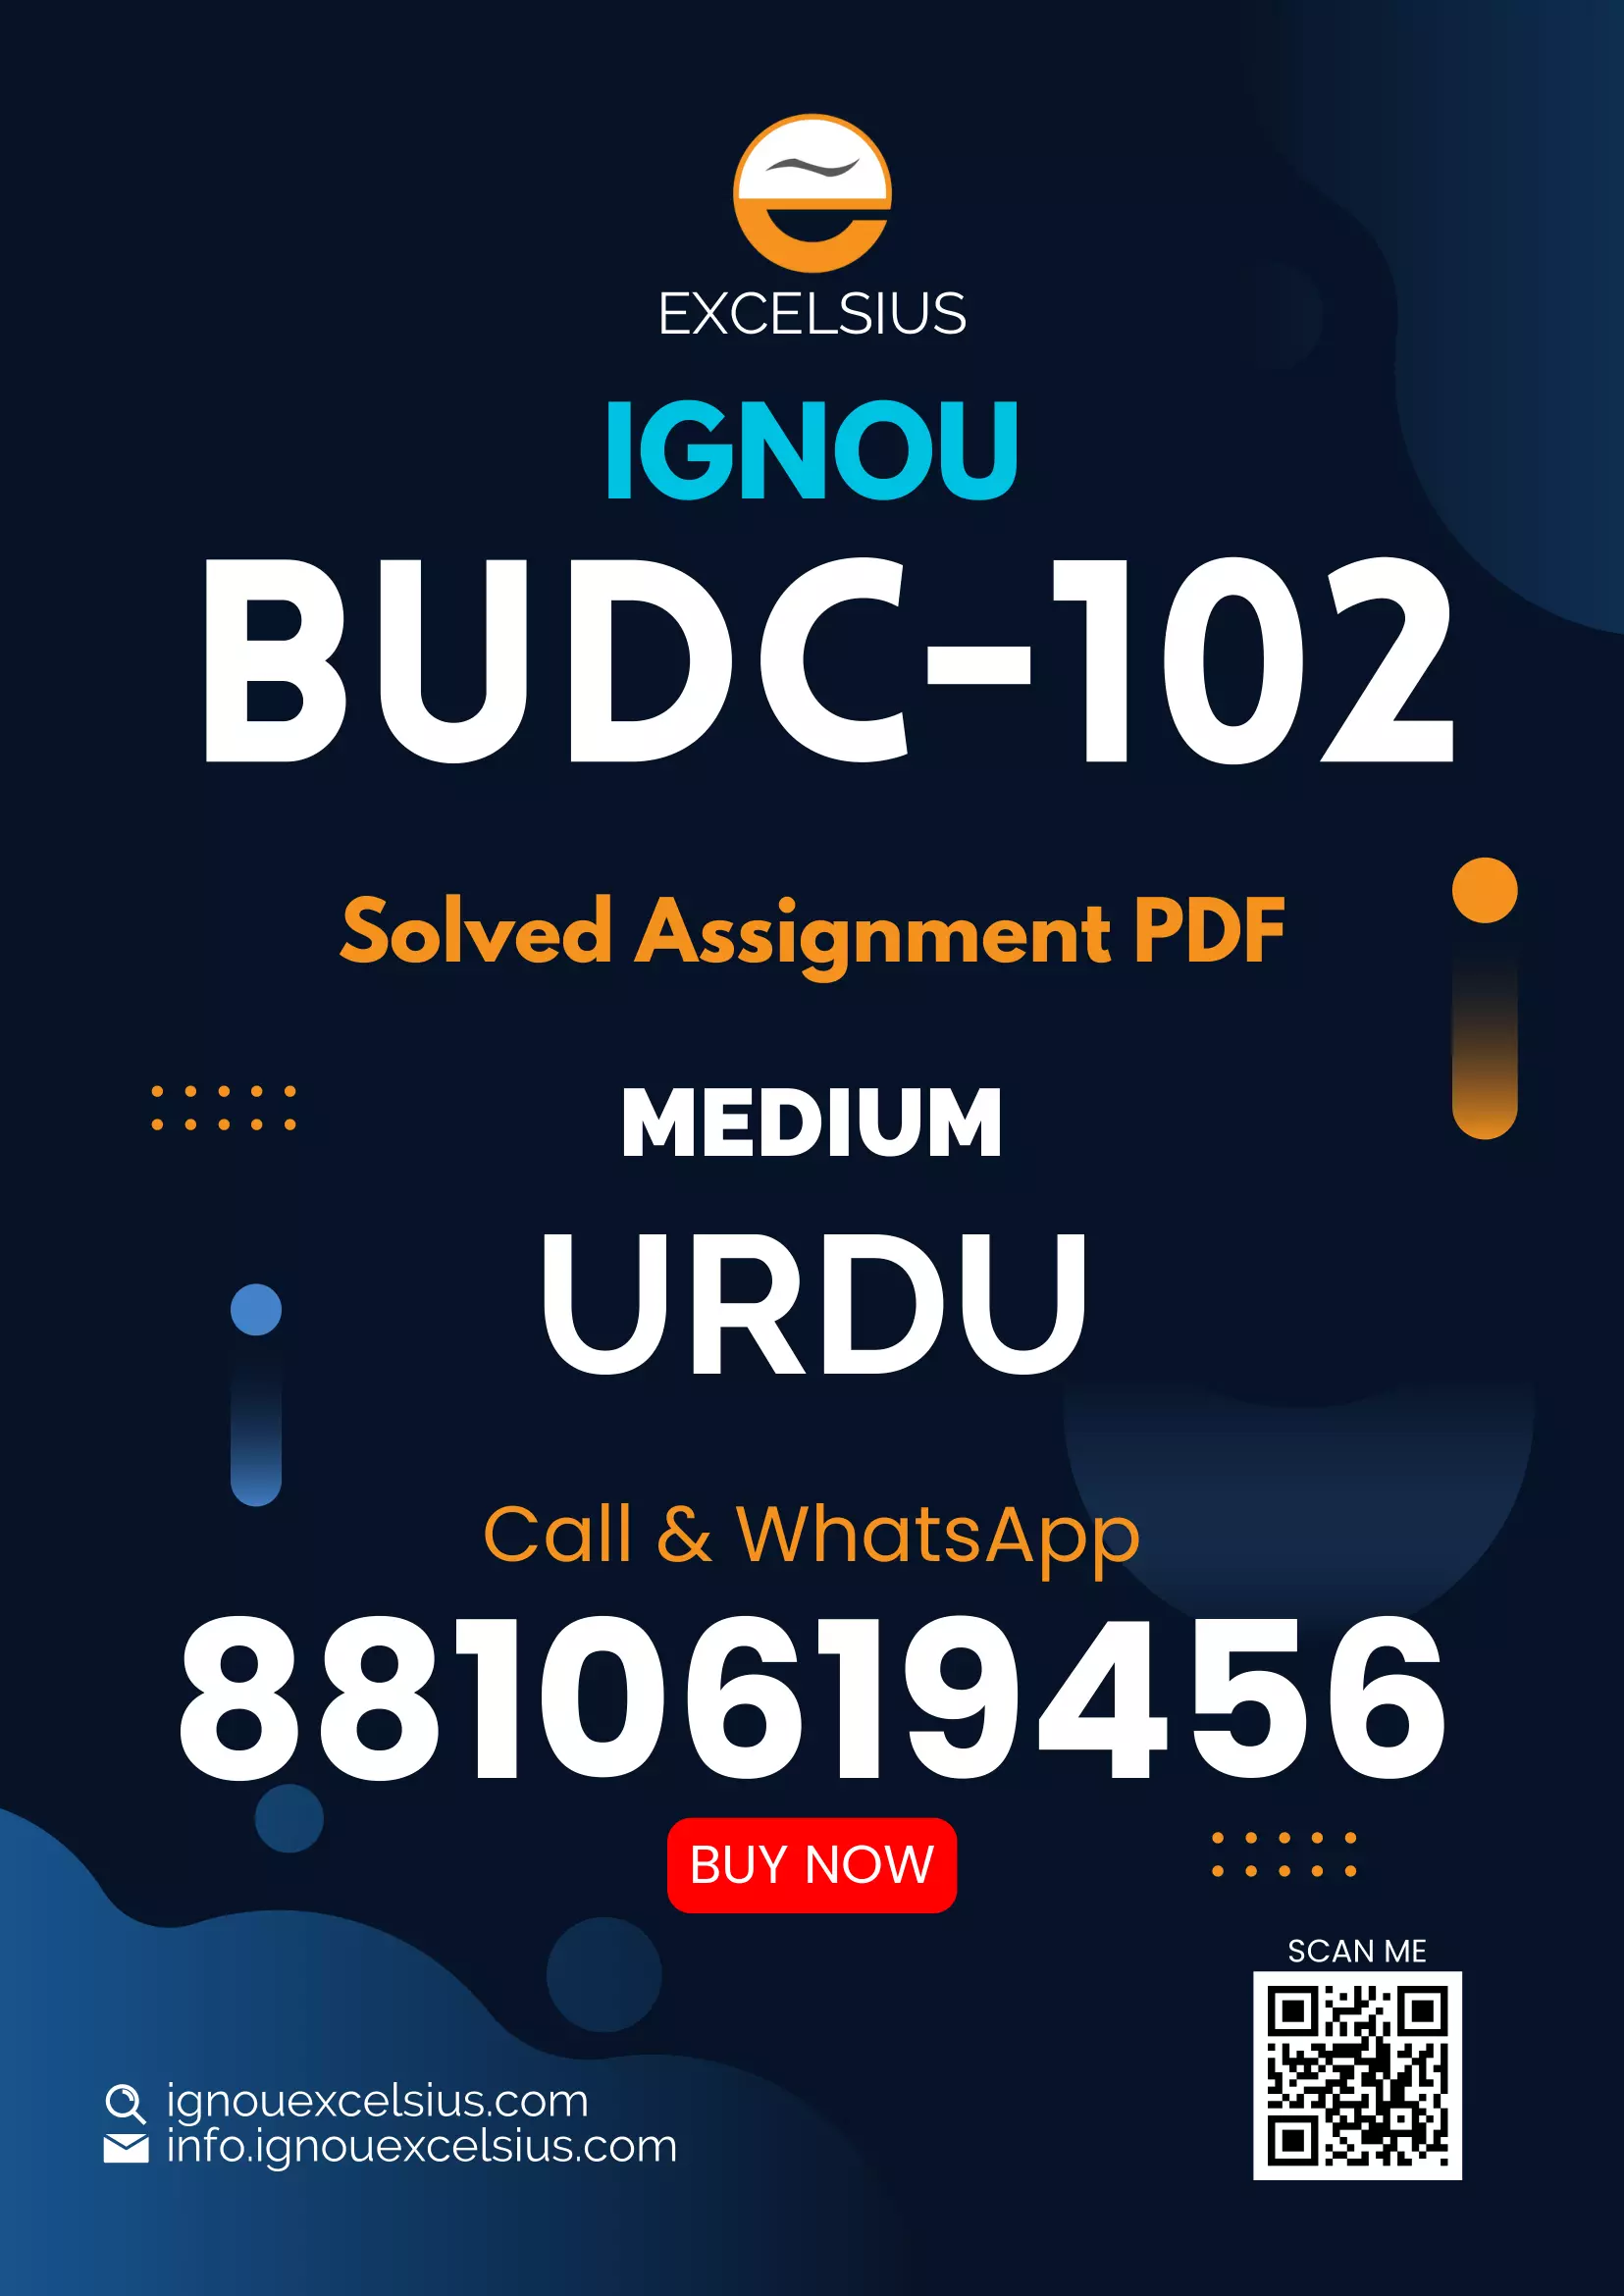 IGNOU BUDC-102 - Study of Urdu Non Fiction Latest Solved Assignment -July 2022 – January 2023